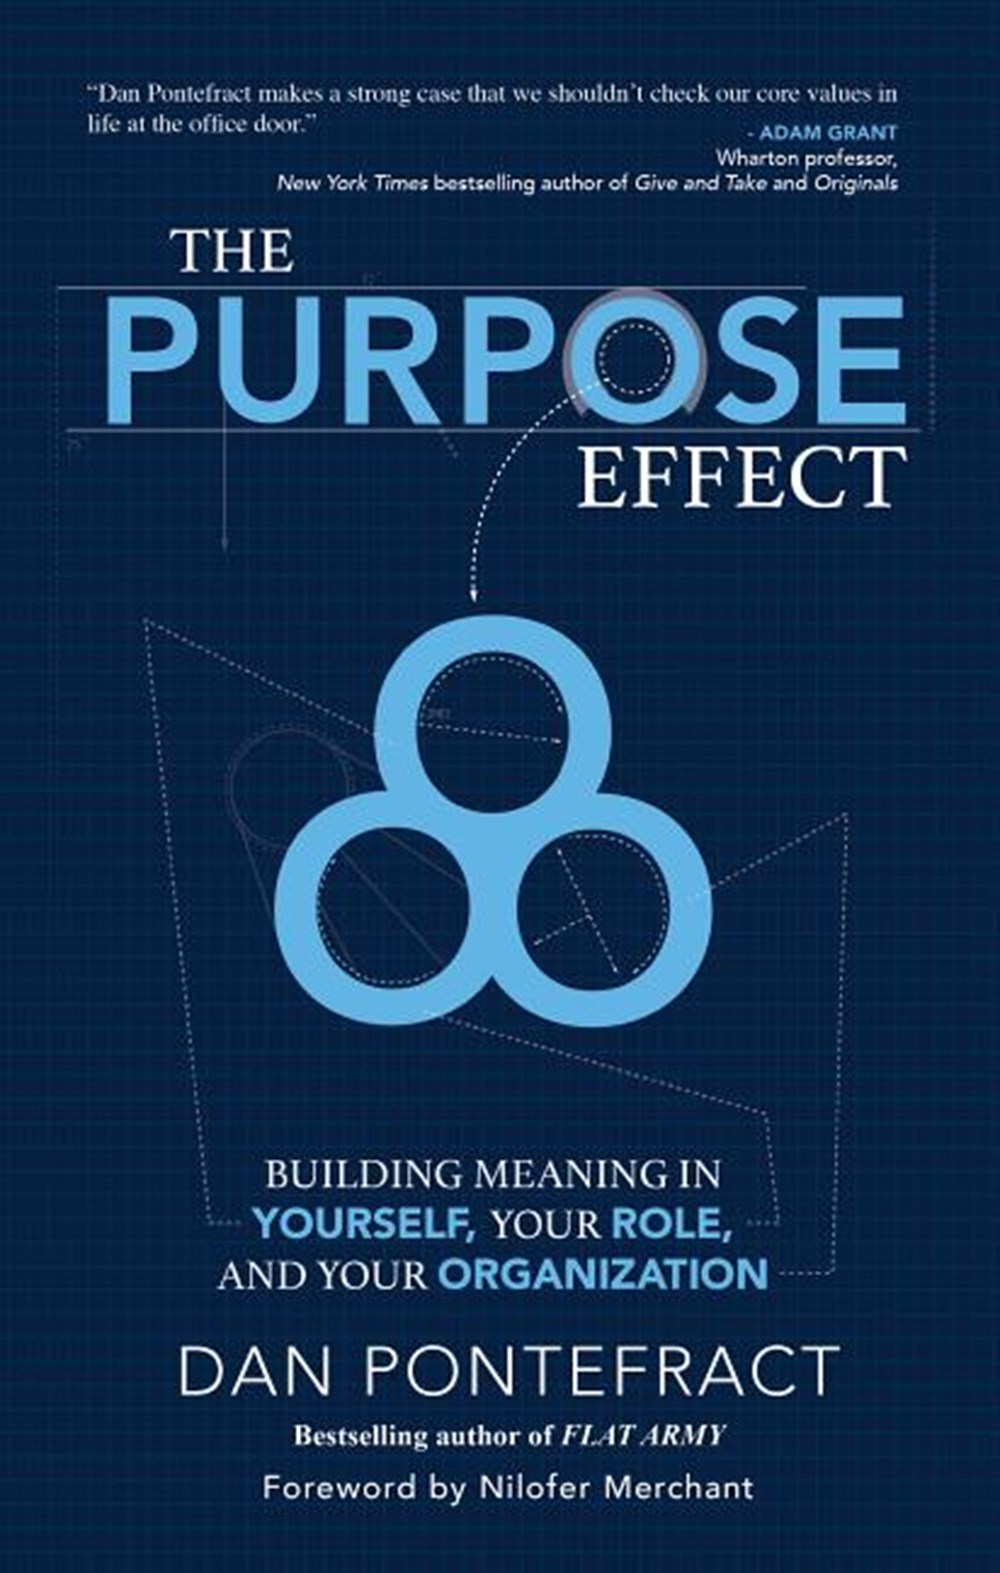 Purpose Effect: Building Meaning in Yourself, Your Role and Your Organization